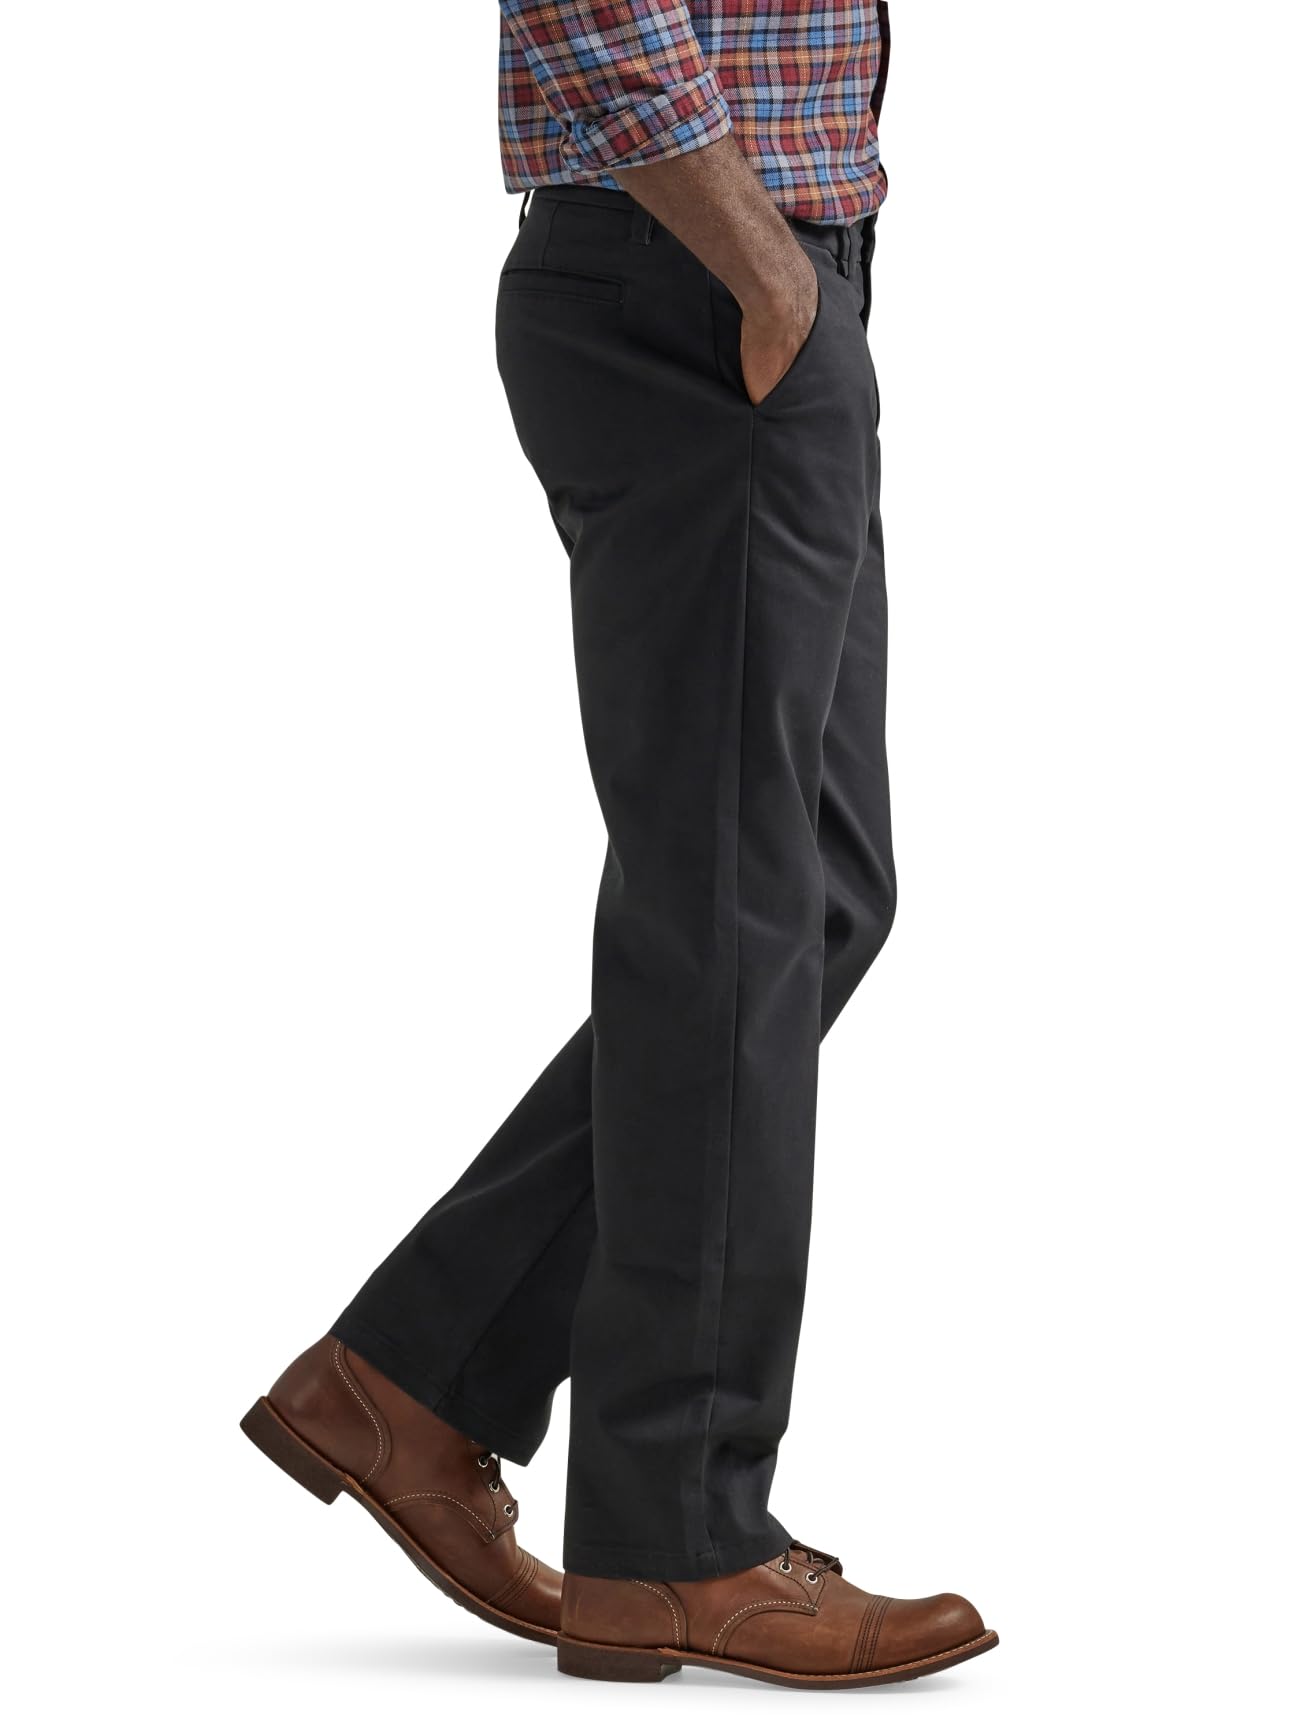 Lee Men's Flat Front Relaxed Straight Pant